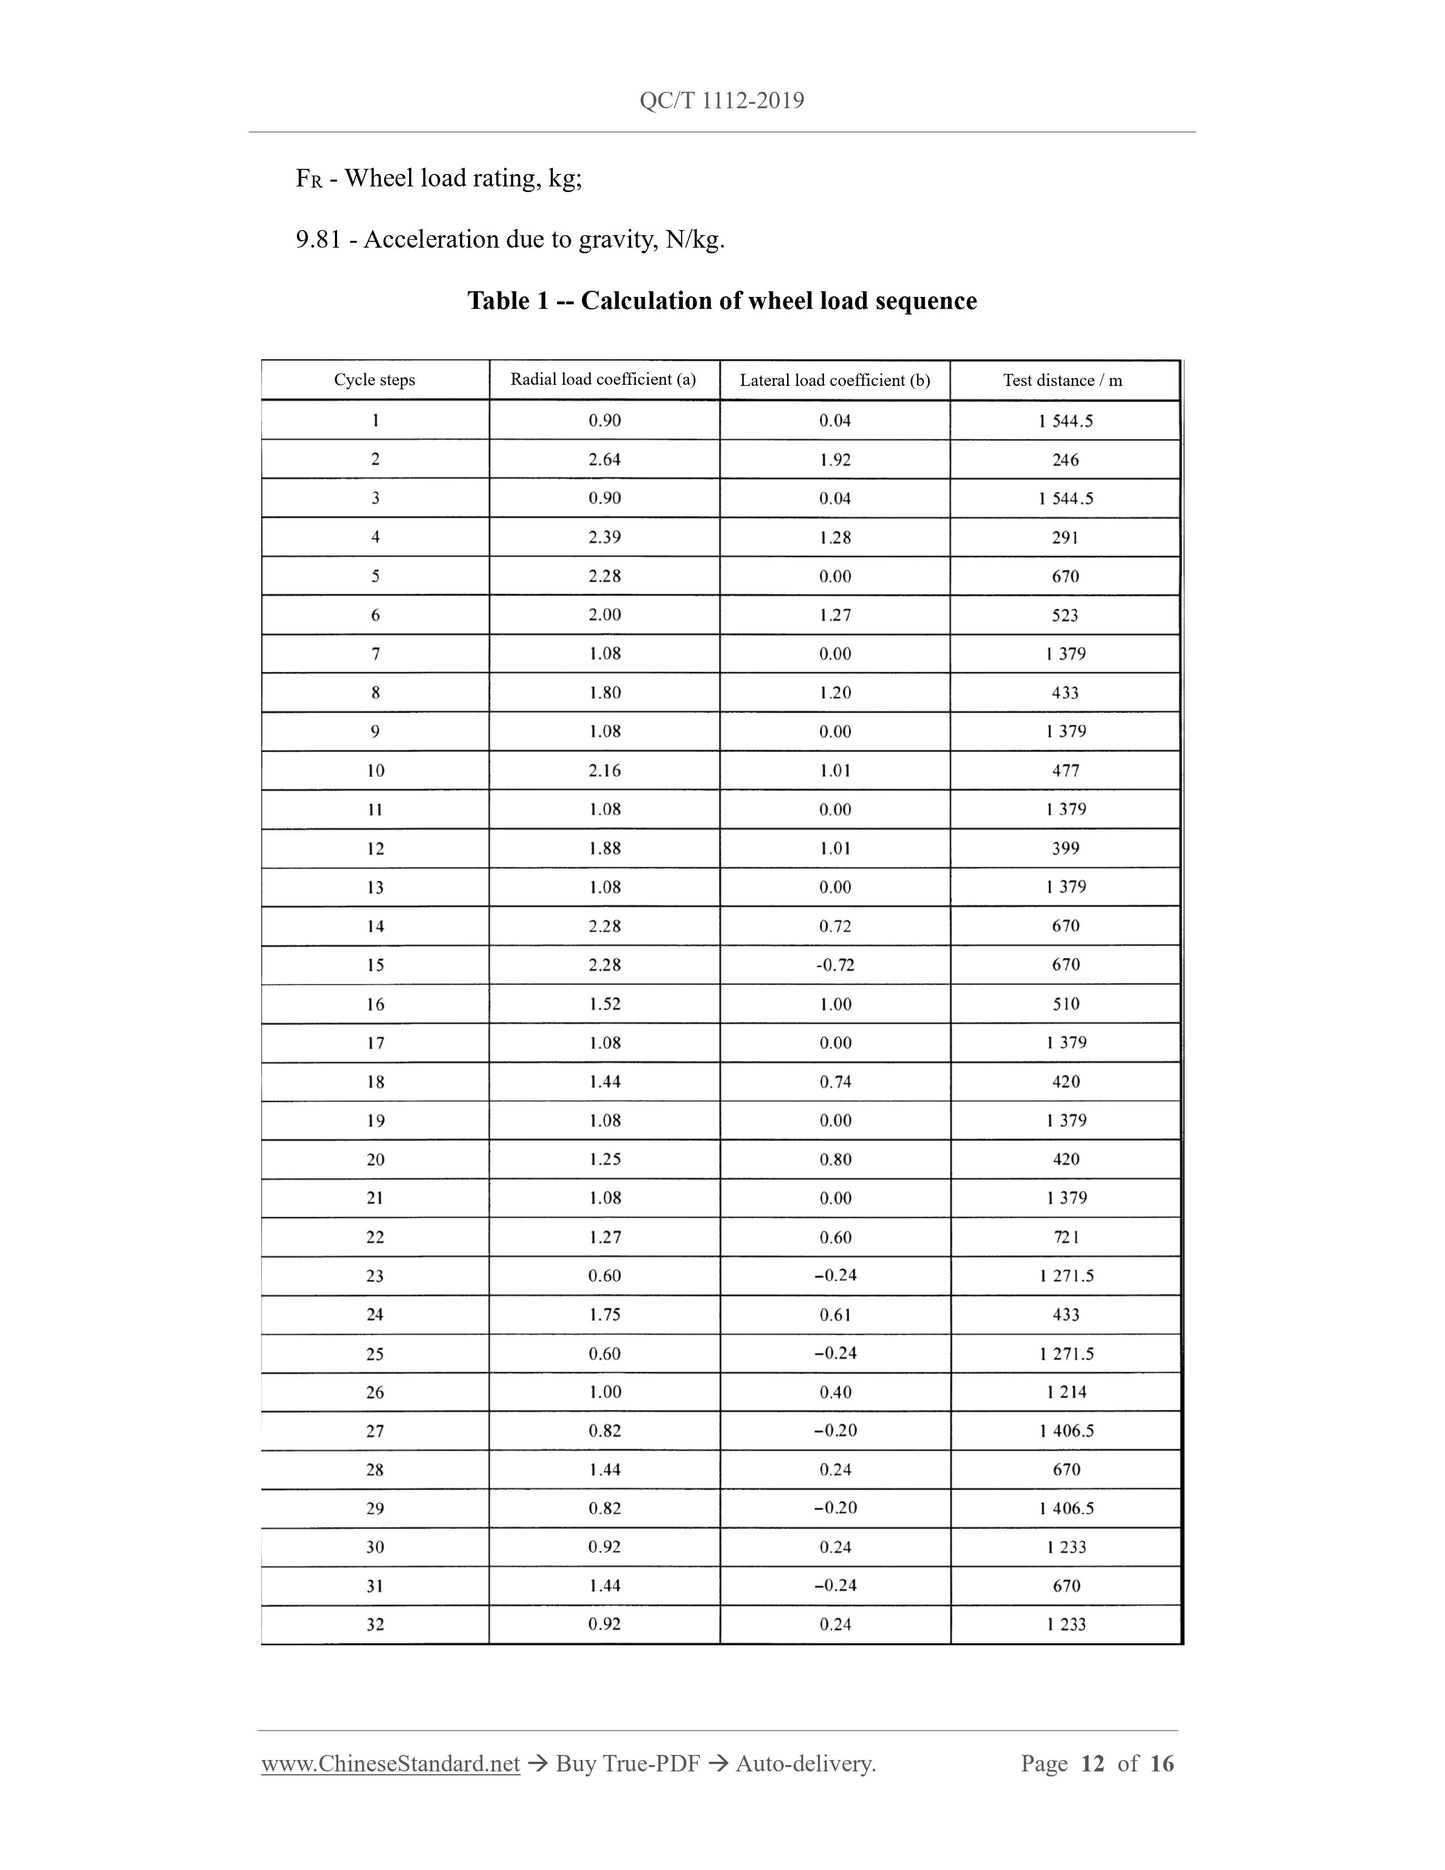 QC/T 1112-2019 Page 12